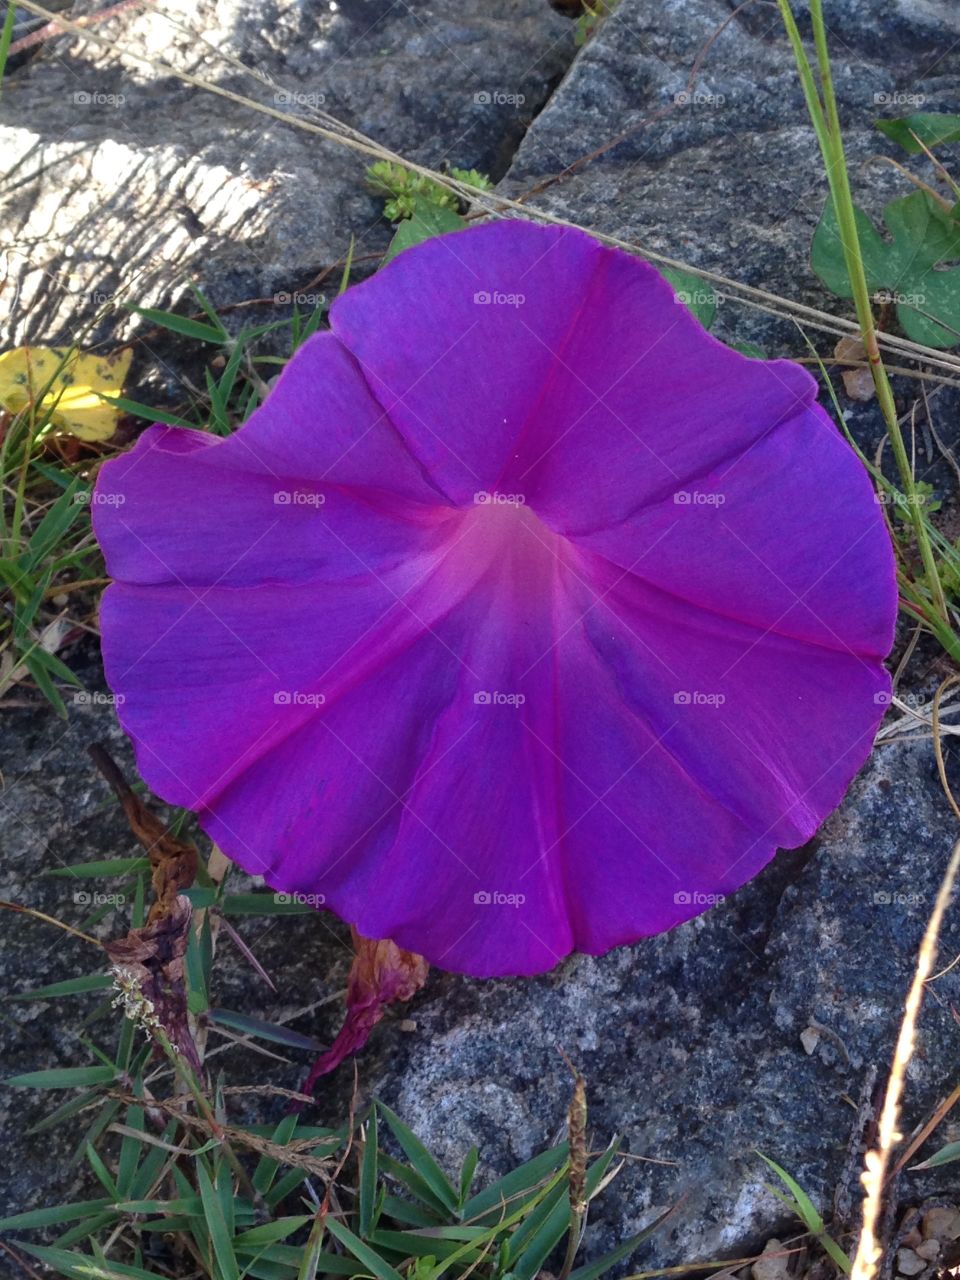 Look this flower,how beautiful it is,I find it in the street and it us alive,like I can't take it out ,so I take a picture of it 😁